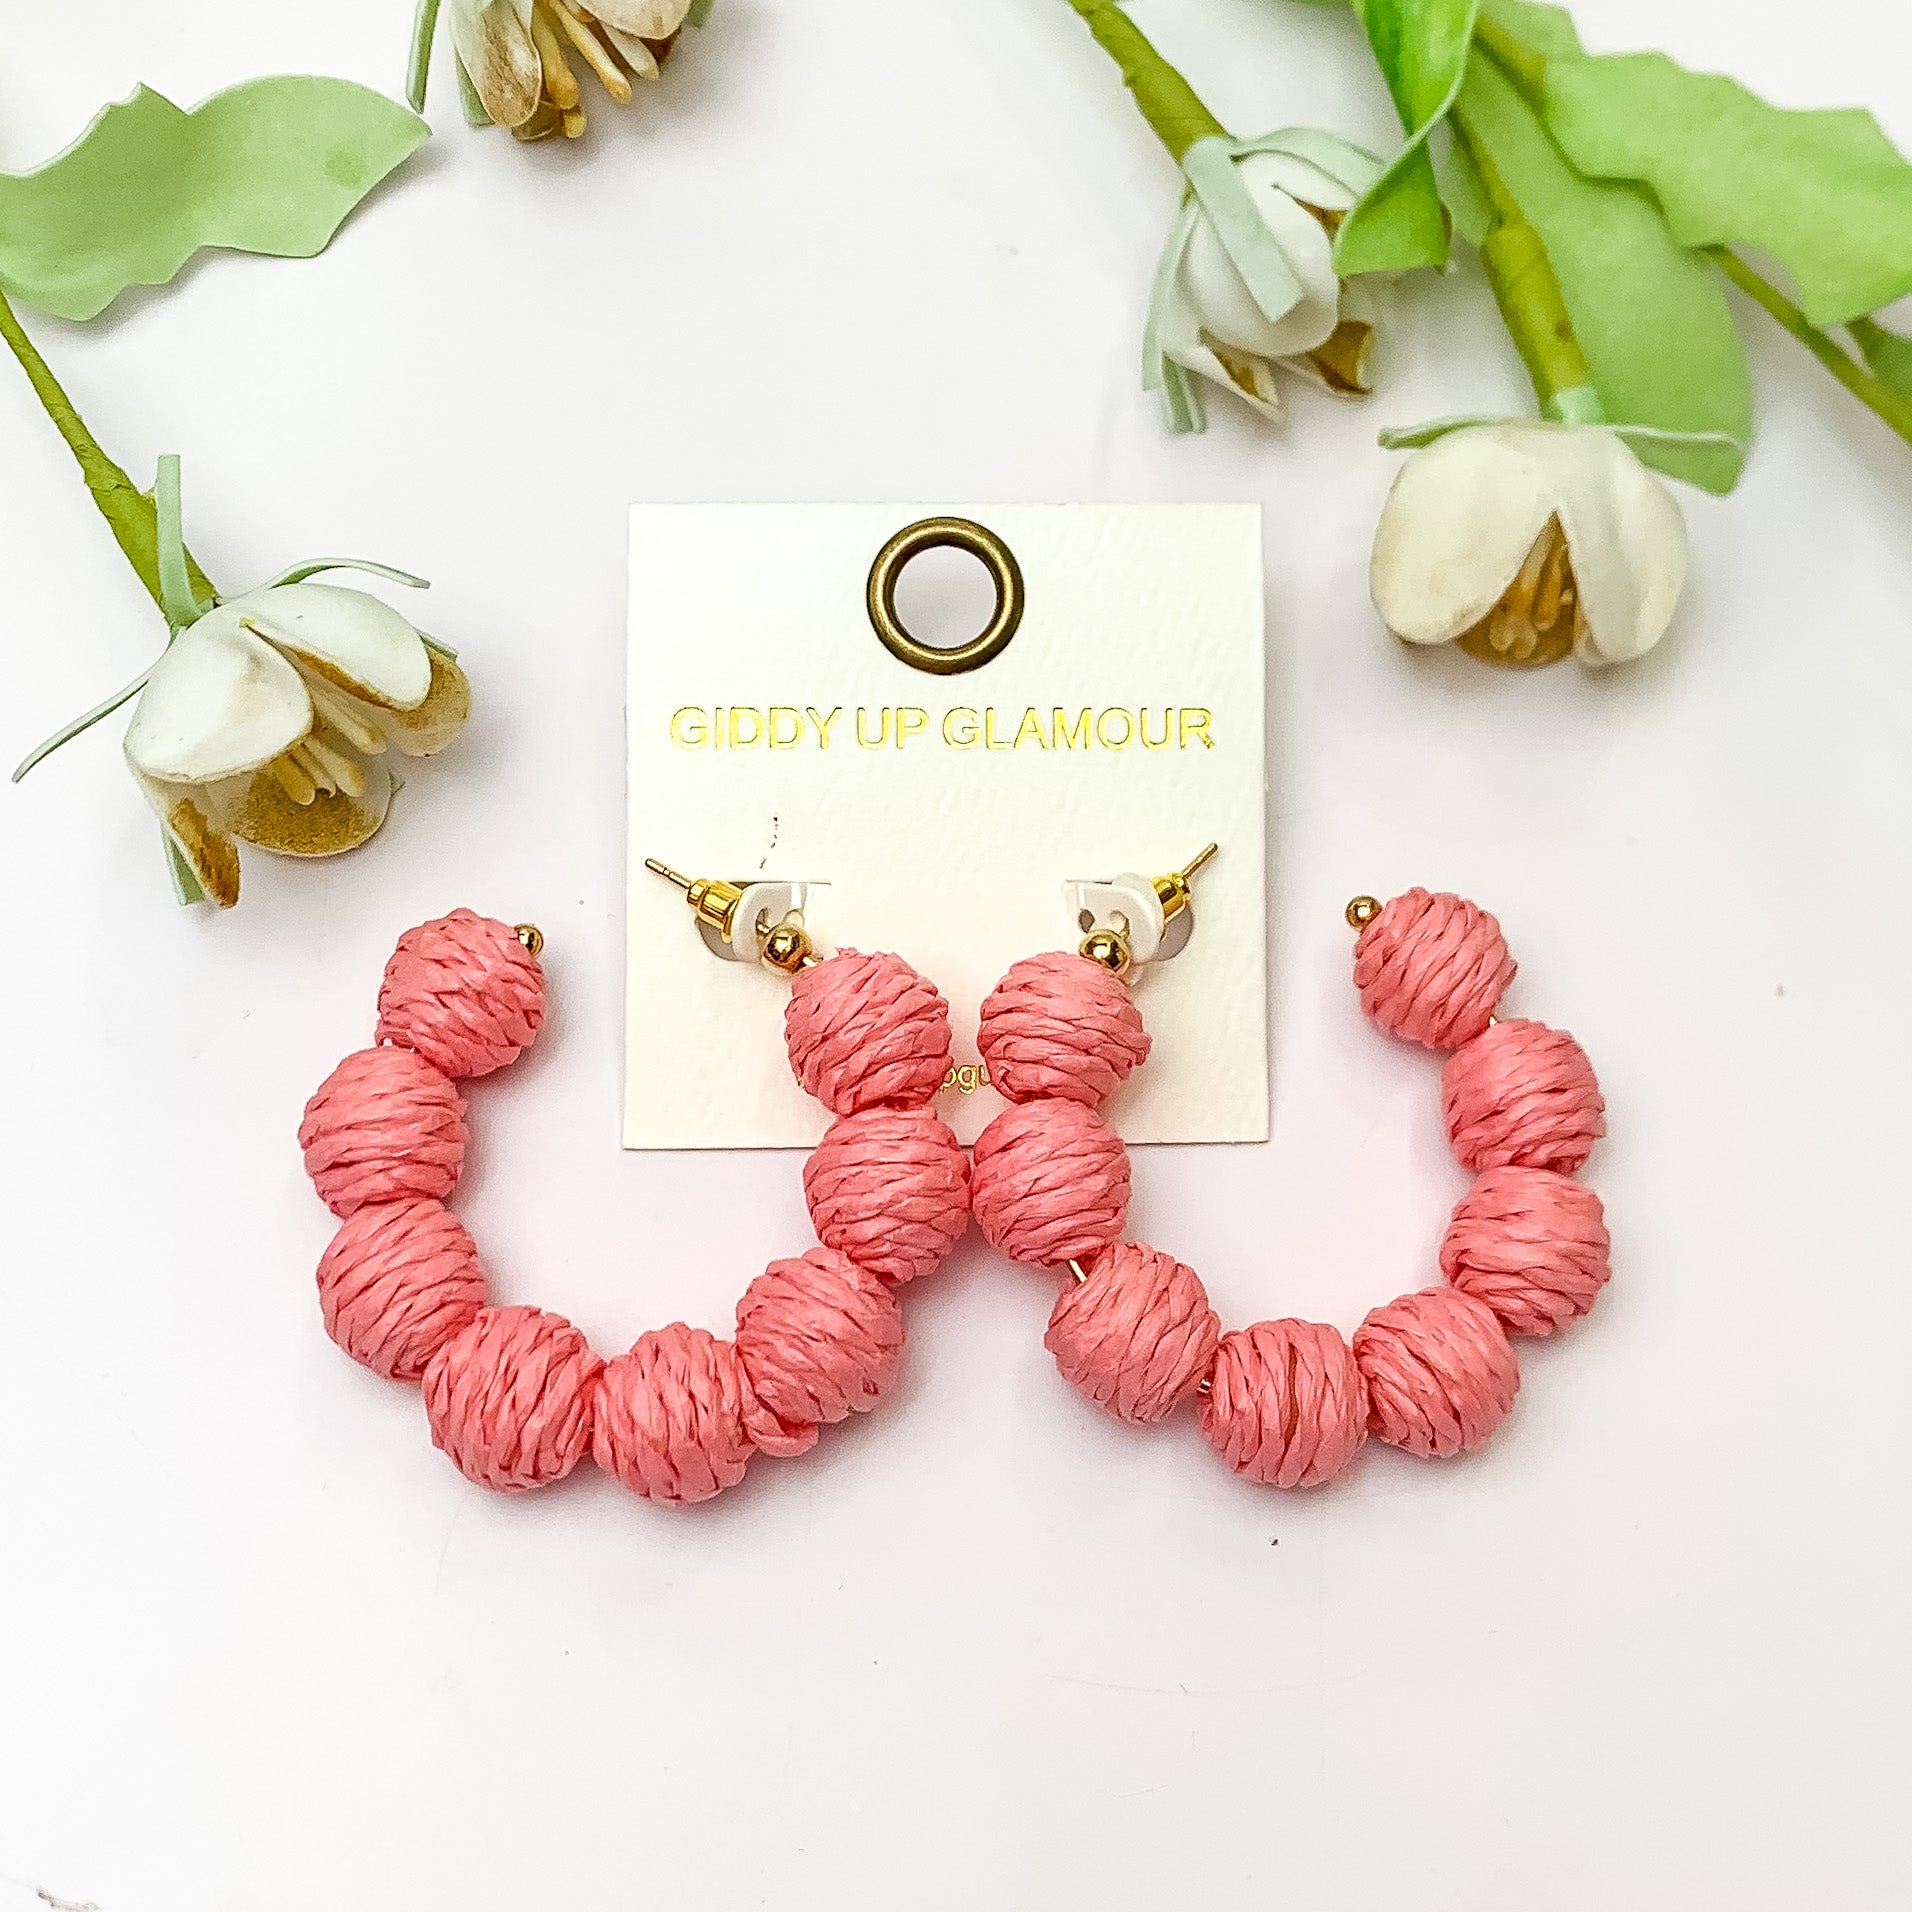 Sorbet Summer Raffia Ball Hoop Earrings in Pink. Pictured on a white background with flowers above the earrings.